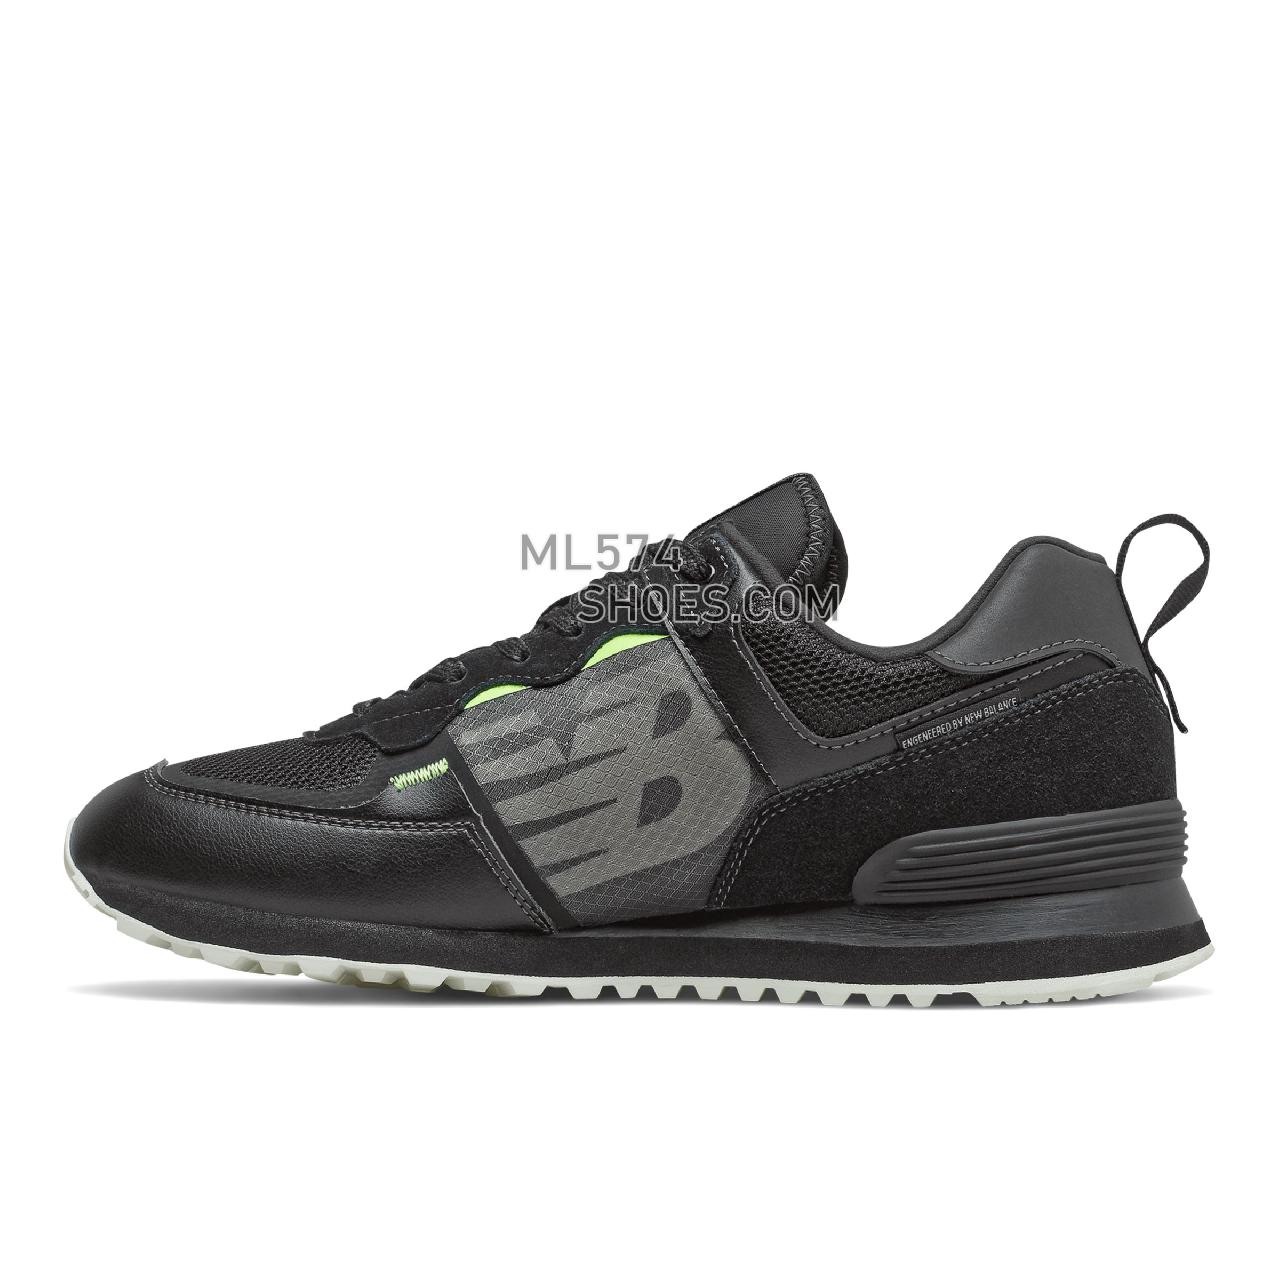 New Balance 574 - Men's Classic Sneakers - Black with Bleached Lime Glo - ML574IDC